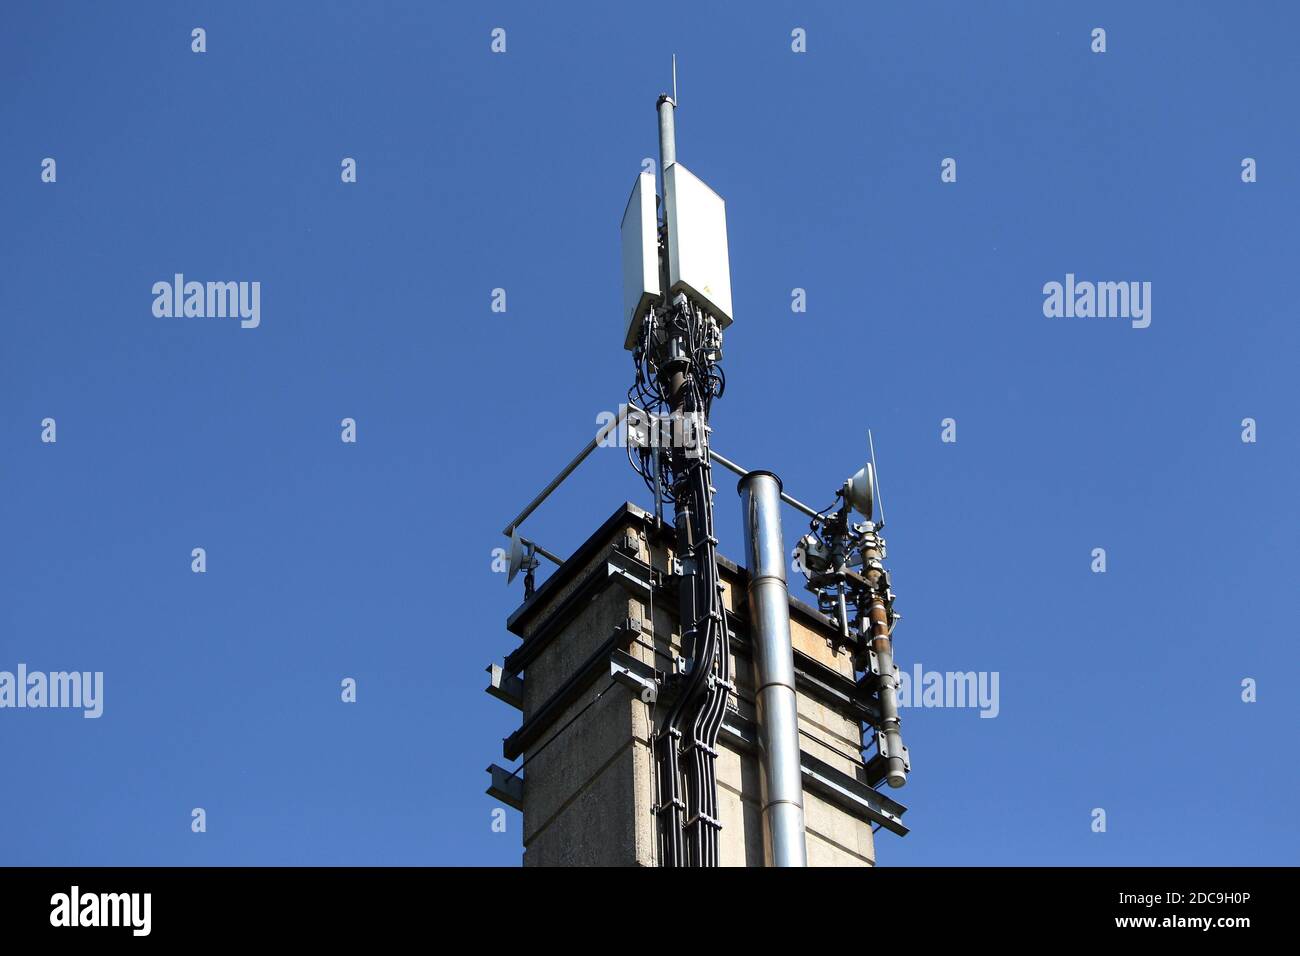 22.04.2019, Hannover, Lower Saxony, Germany - Germany - Transmitting mast for mobile radio. 00S190422D487CAROEX.JPG [MODEL RELEASE: NOT APPLICABLE, PR Stock Photo